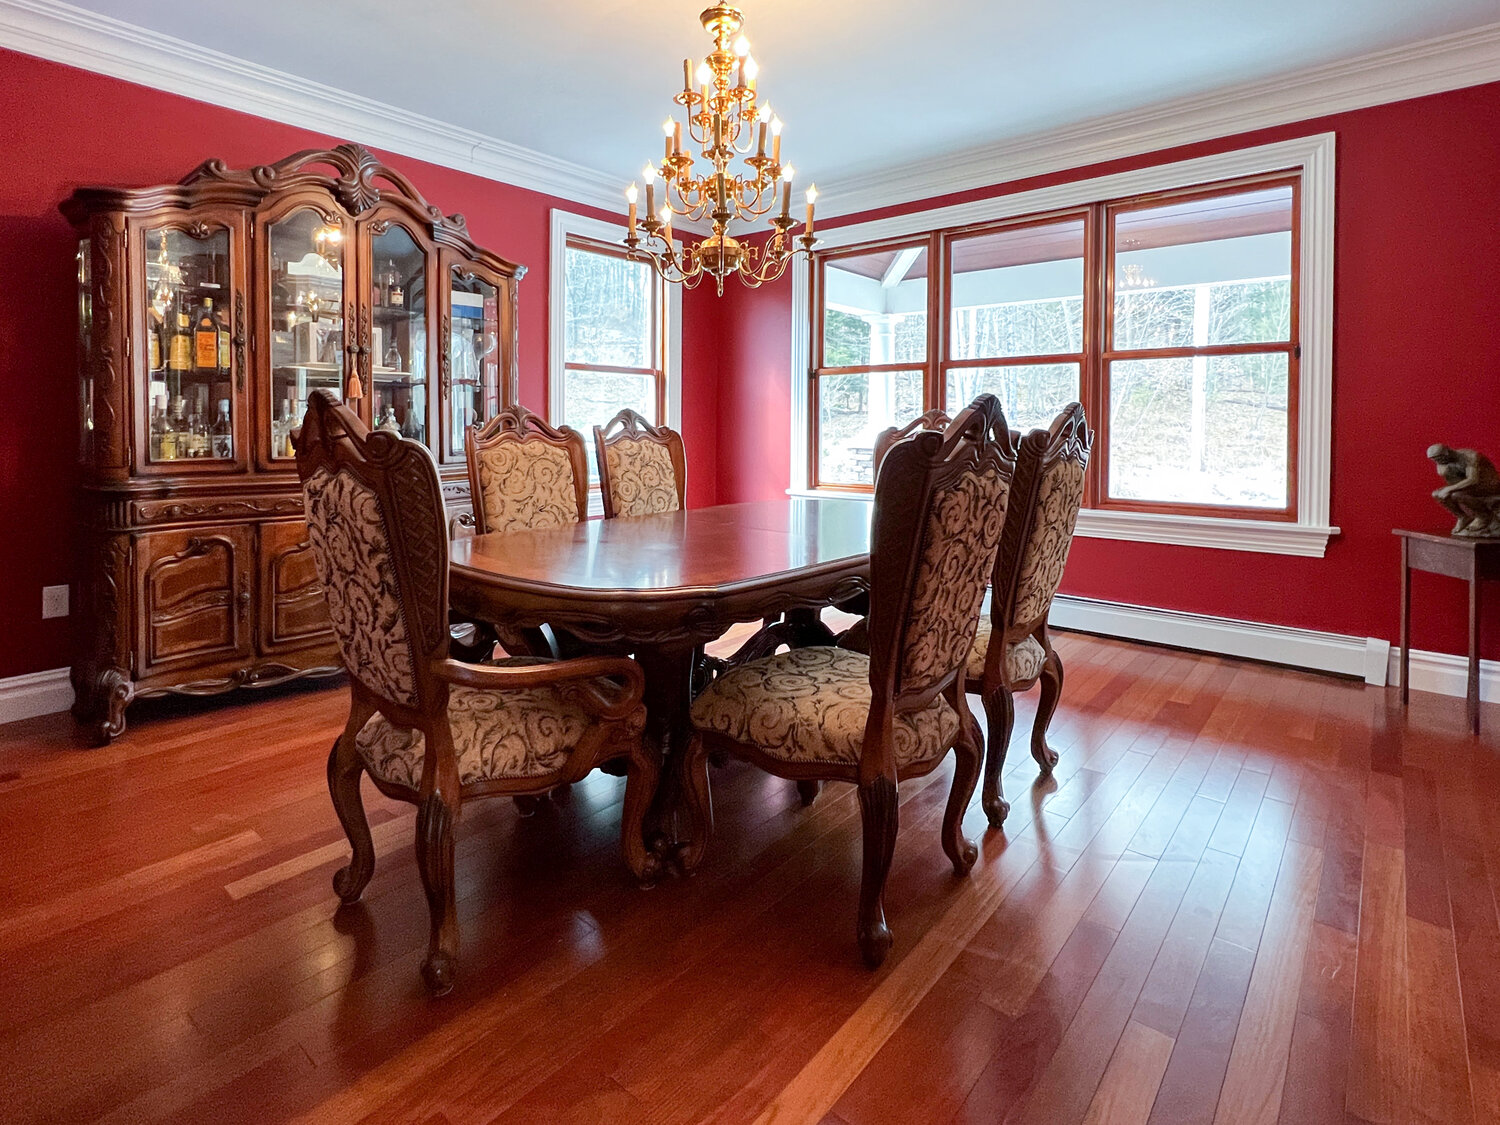 The formal dining room is dressed with cherry-red walls and a rich cherry floor.